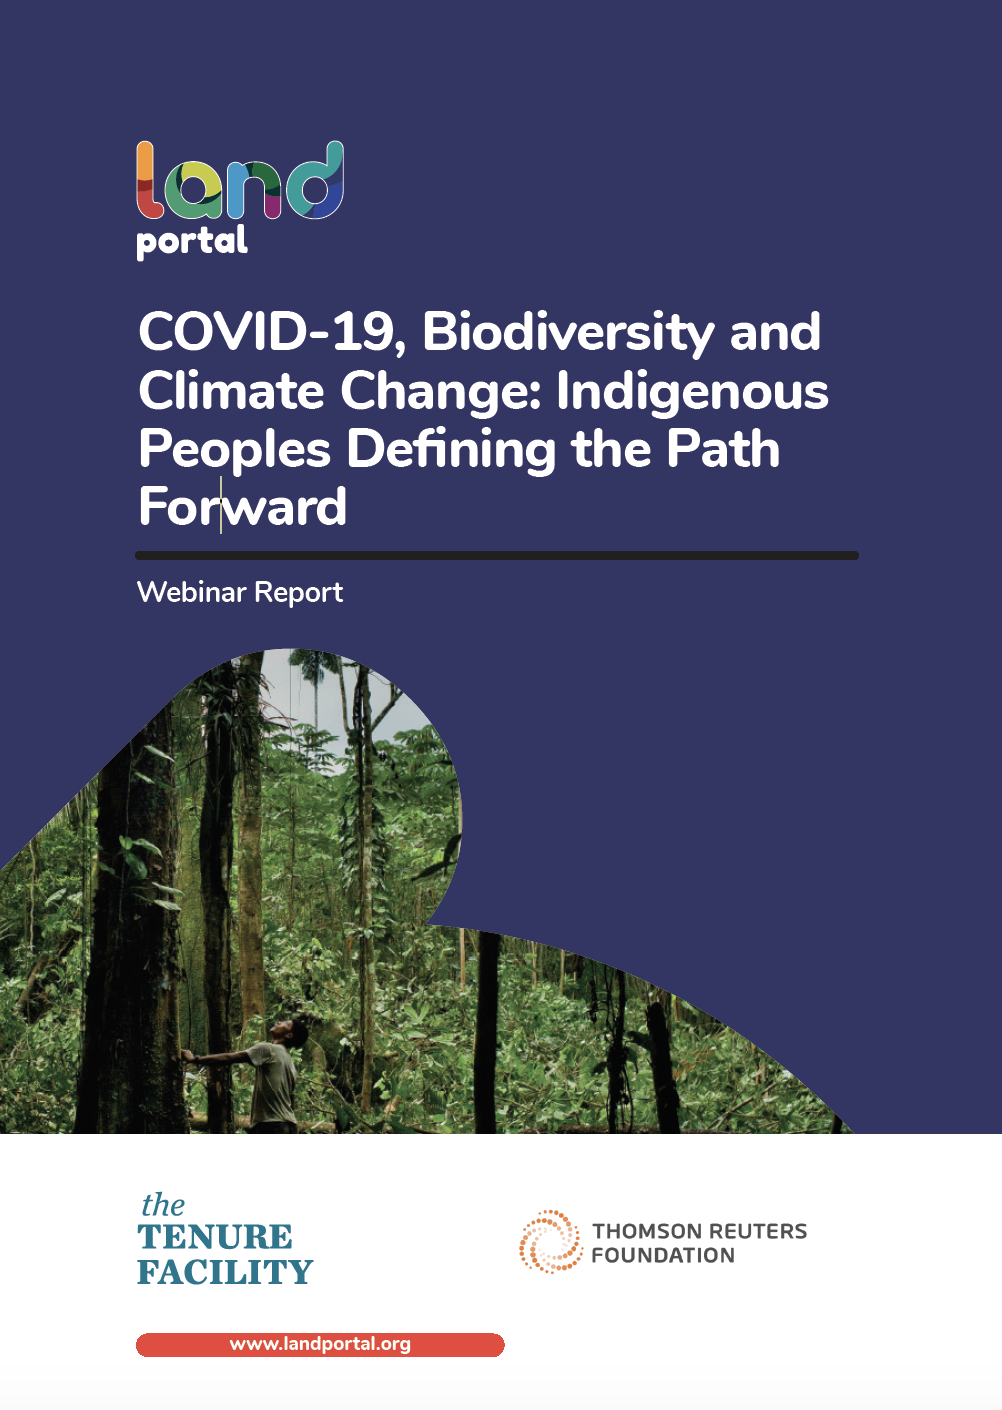 COVID-19, Biodiversity and Climate Change: Indigenous Peoples Defining the Path Forward